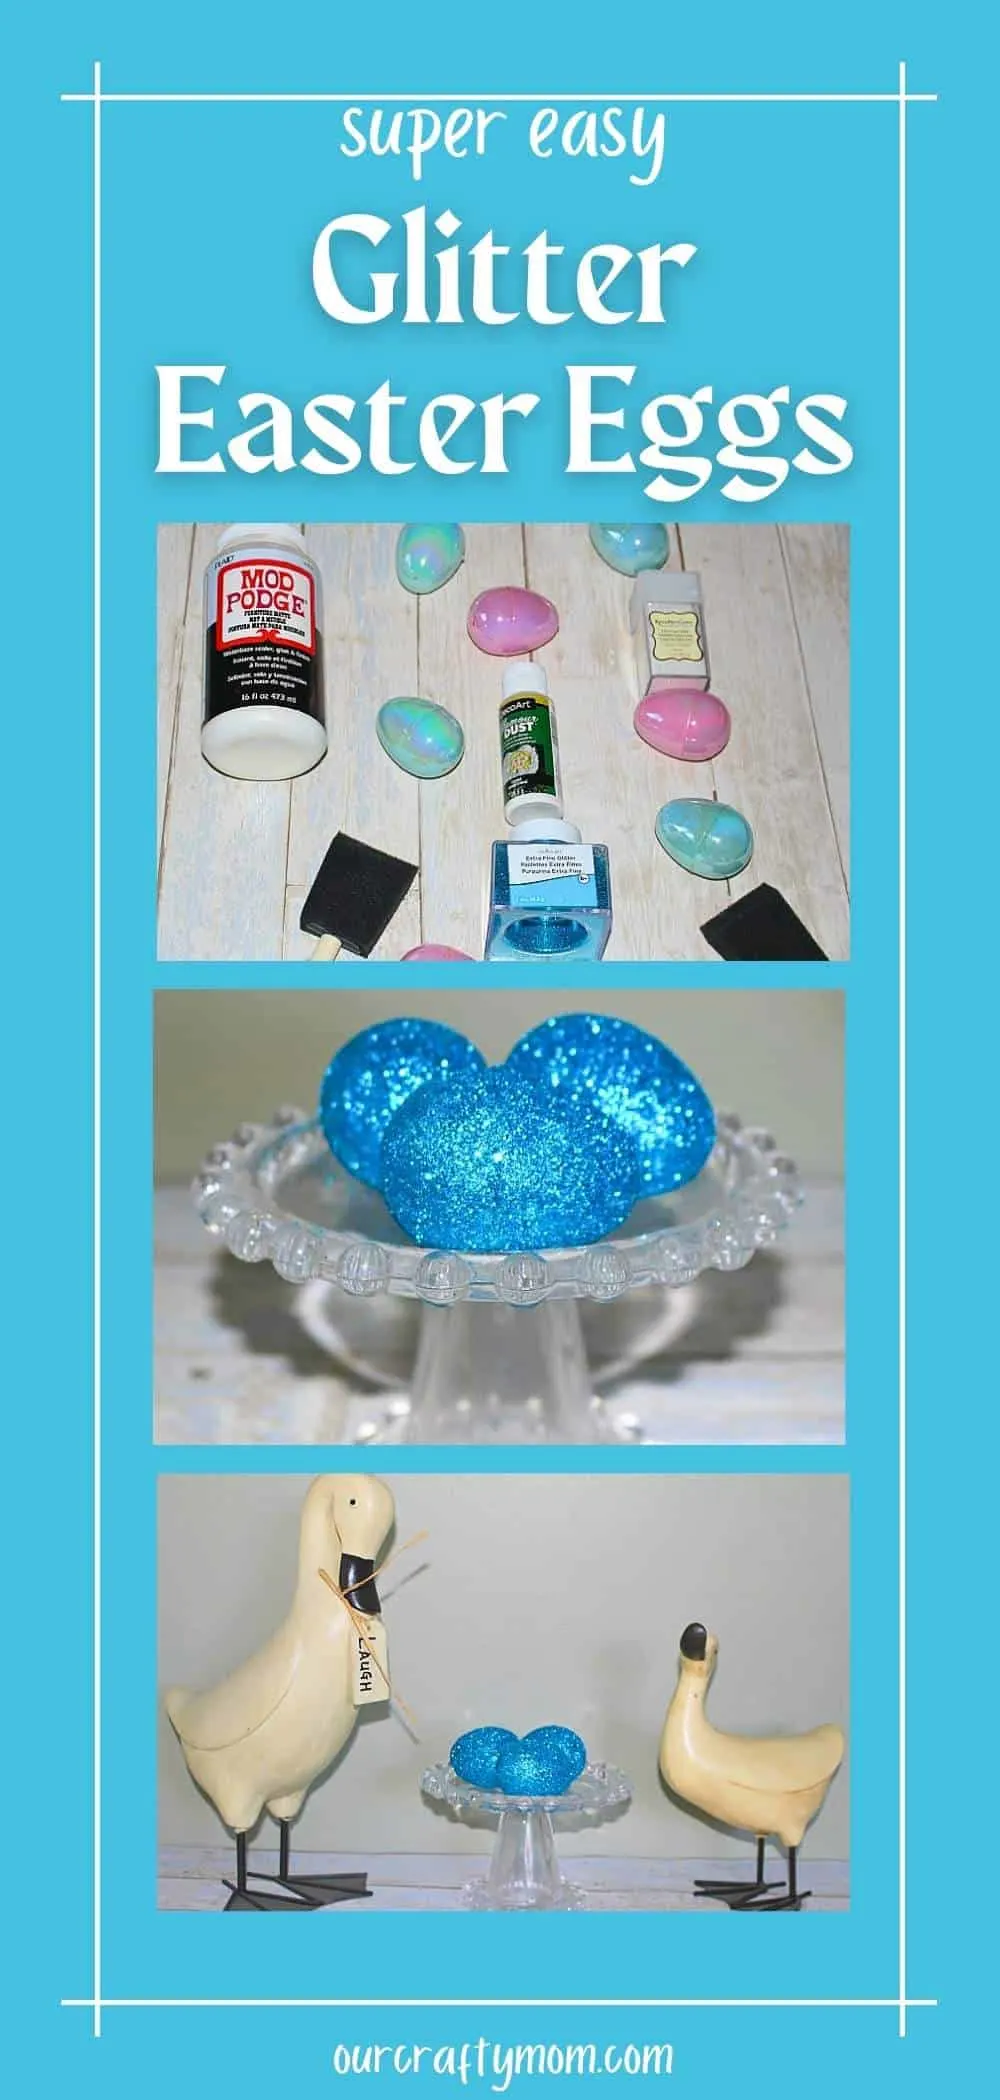 Easter eggs updated with mod podge supplies